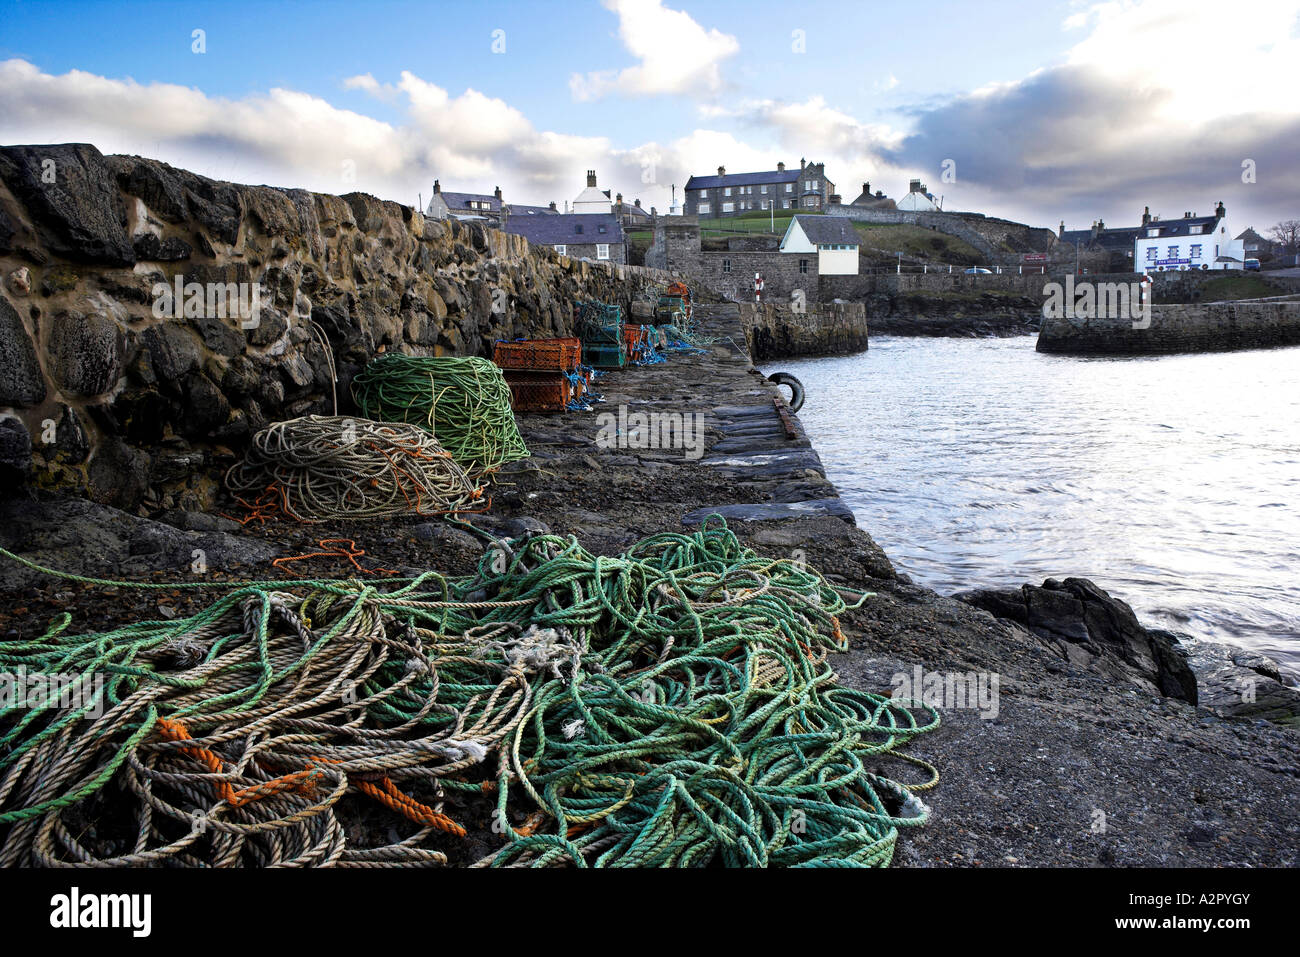 Portsoy Old harbour on the Banffshire coastline, North East Scotland with fishing nets and ots in foreground. Stock Photo